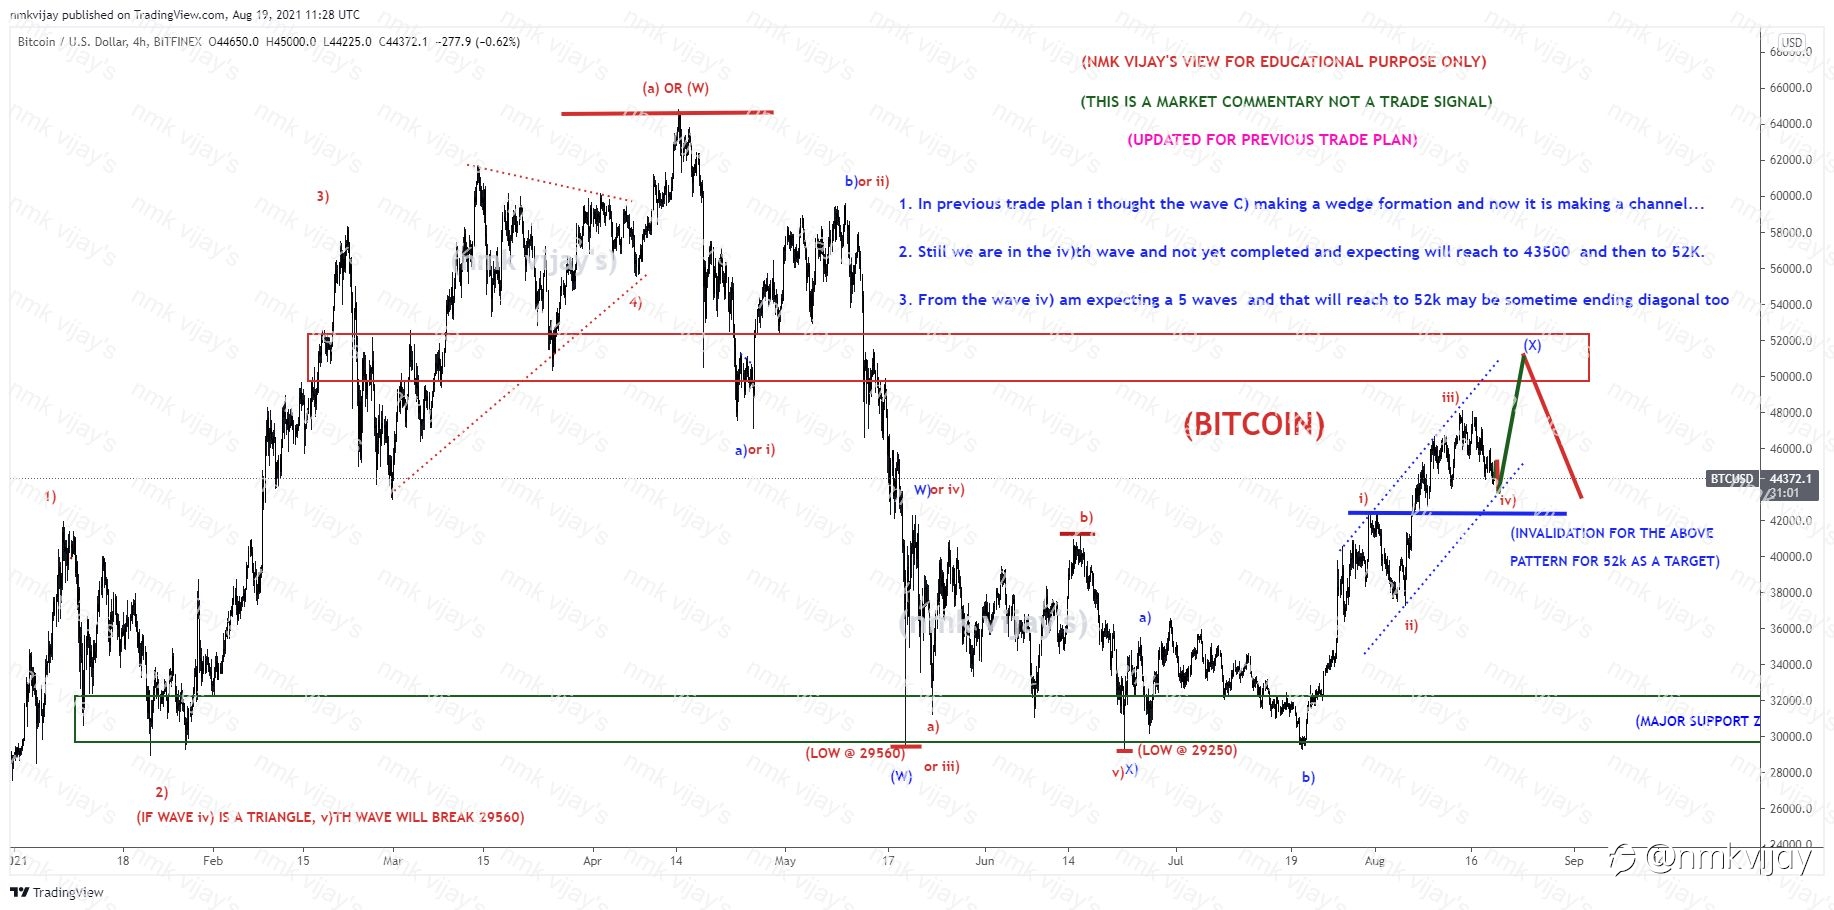 BITCOIN- Wave iv) in progress and wave v) to 52K ?